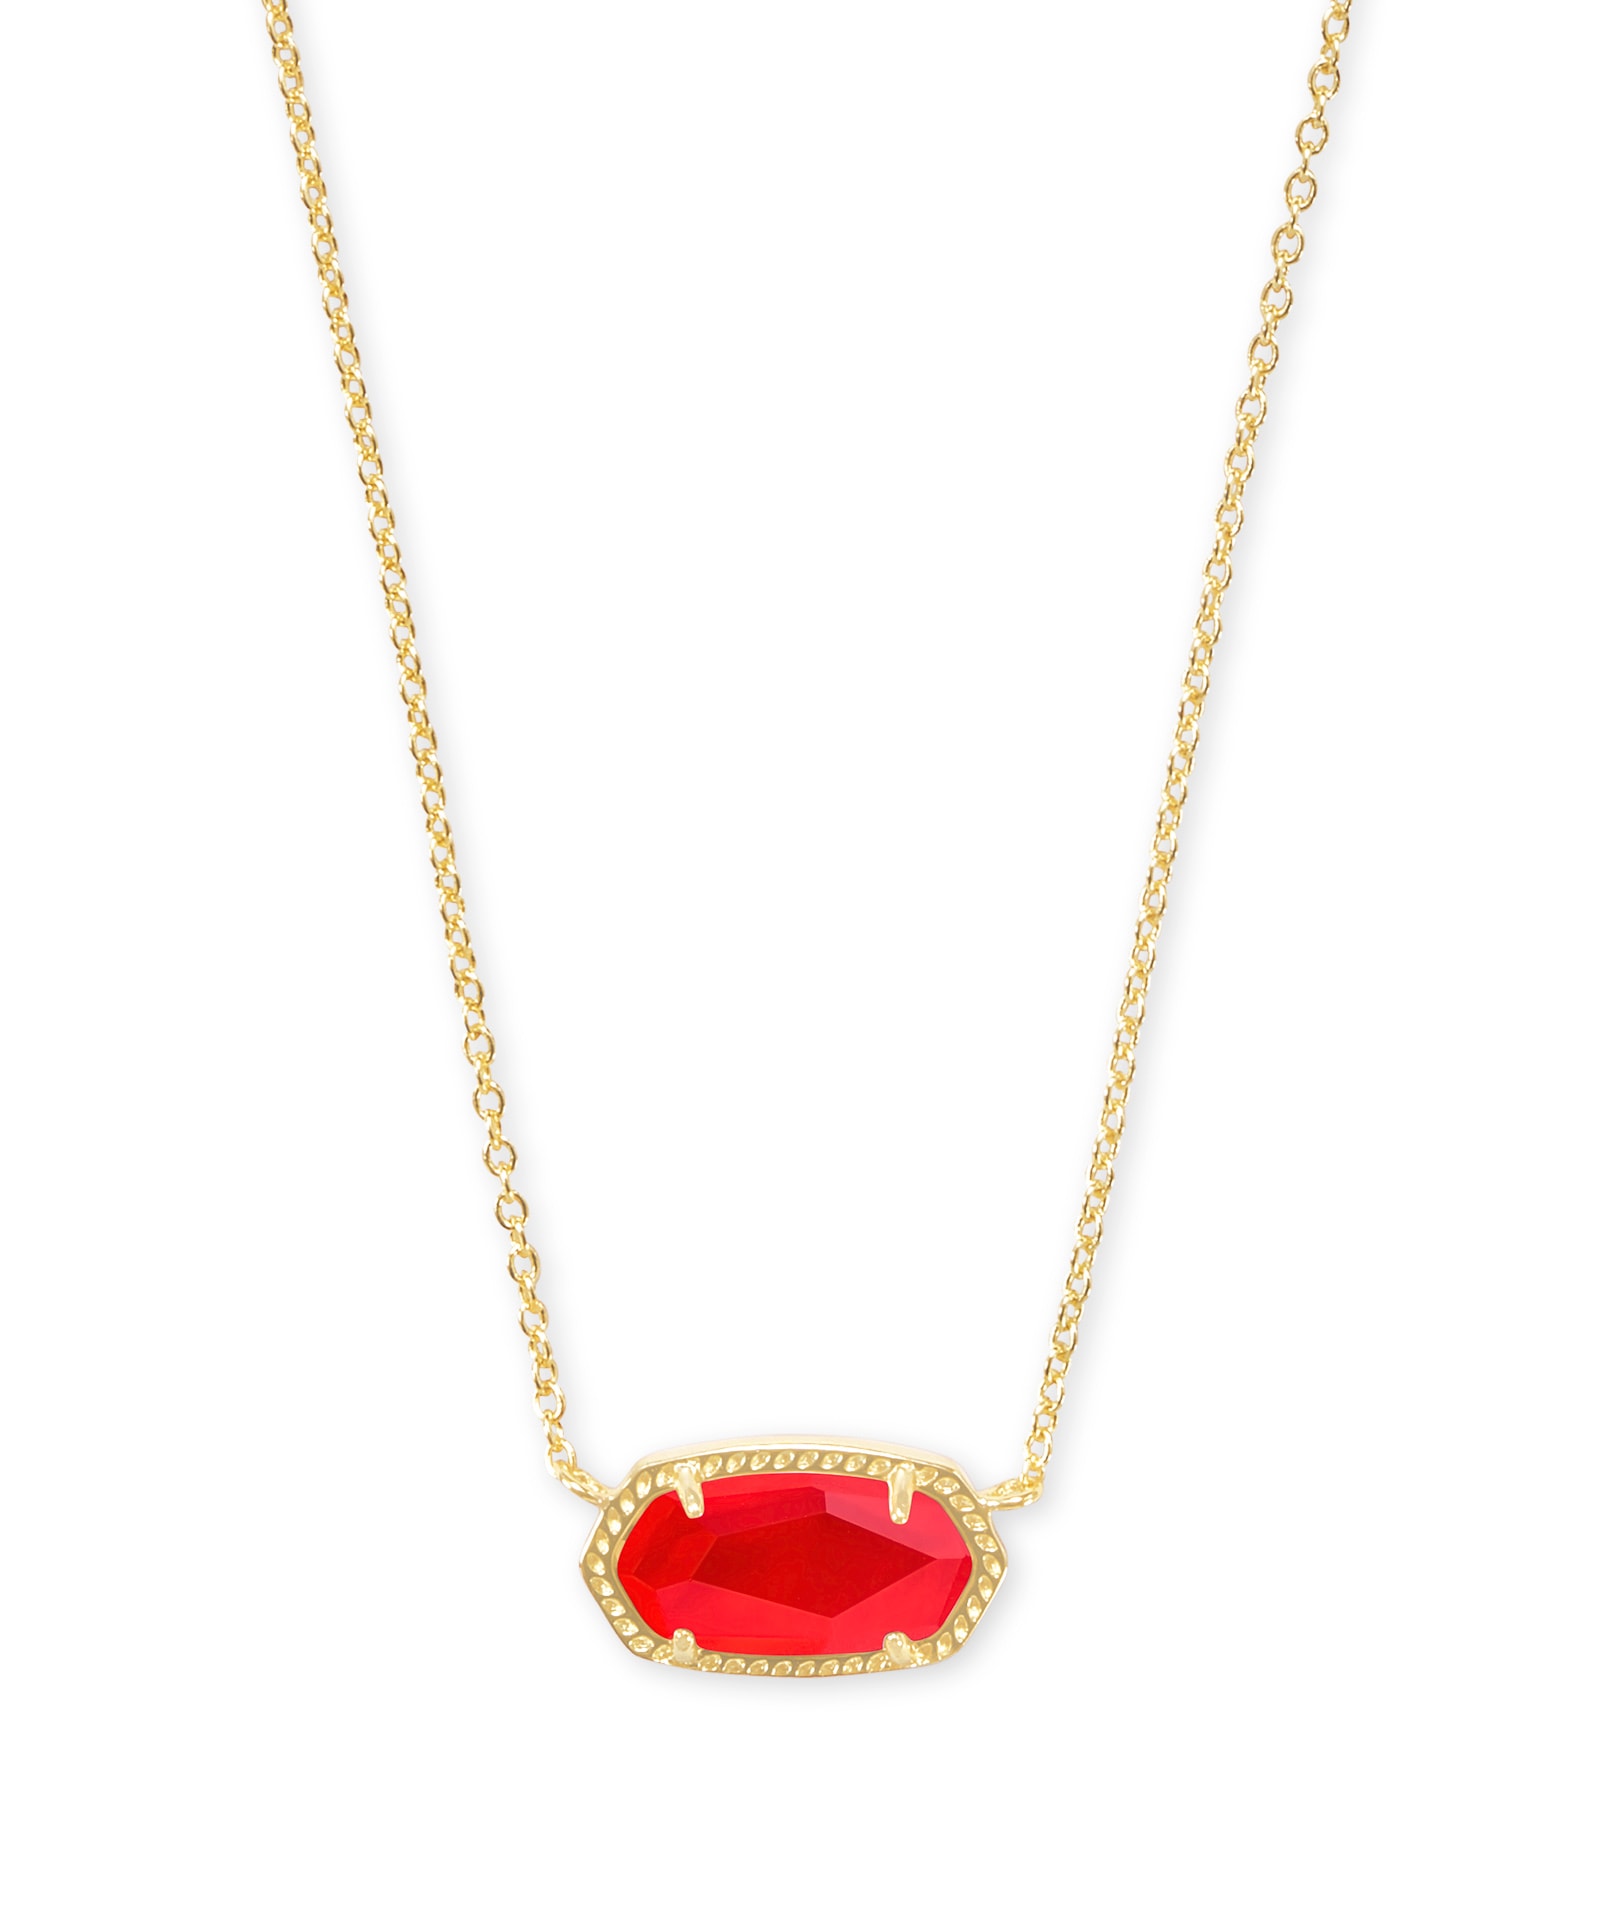 Kendra Scott Elisa Gold Pendant Necklace in Red Illusion | Glass/Mother Of Pearl